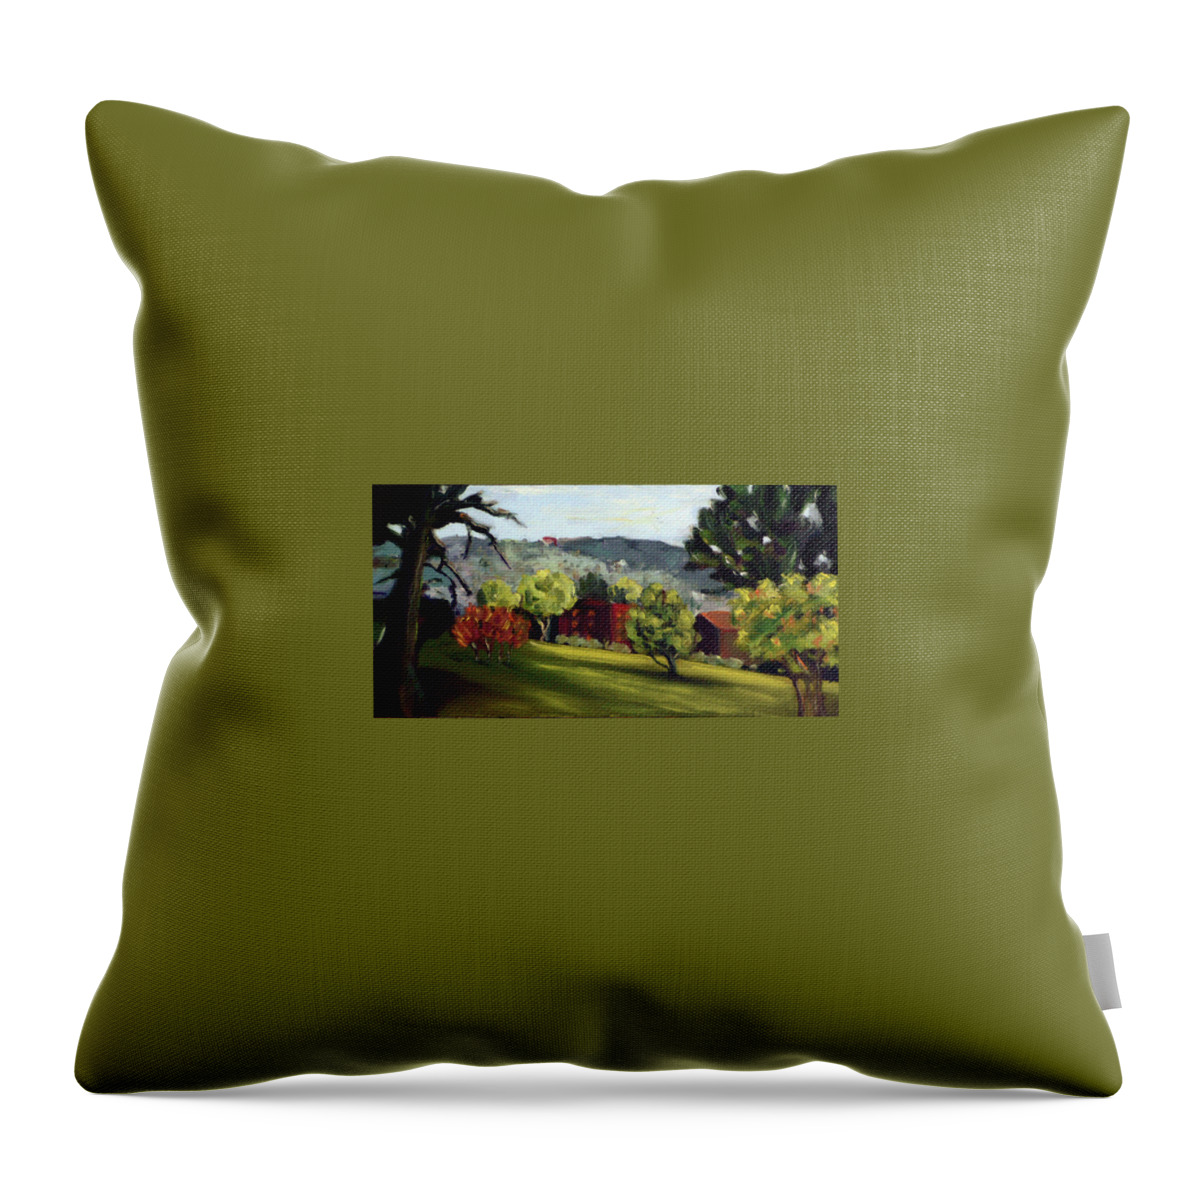 Lawn Throw Pillow featuring the painting Lawn at Fort Mason by Karen Coggeshall